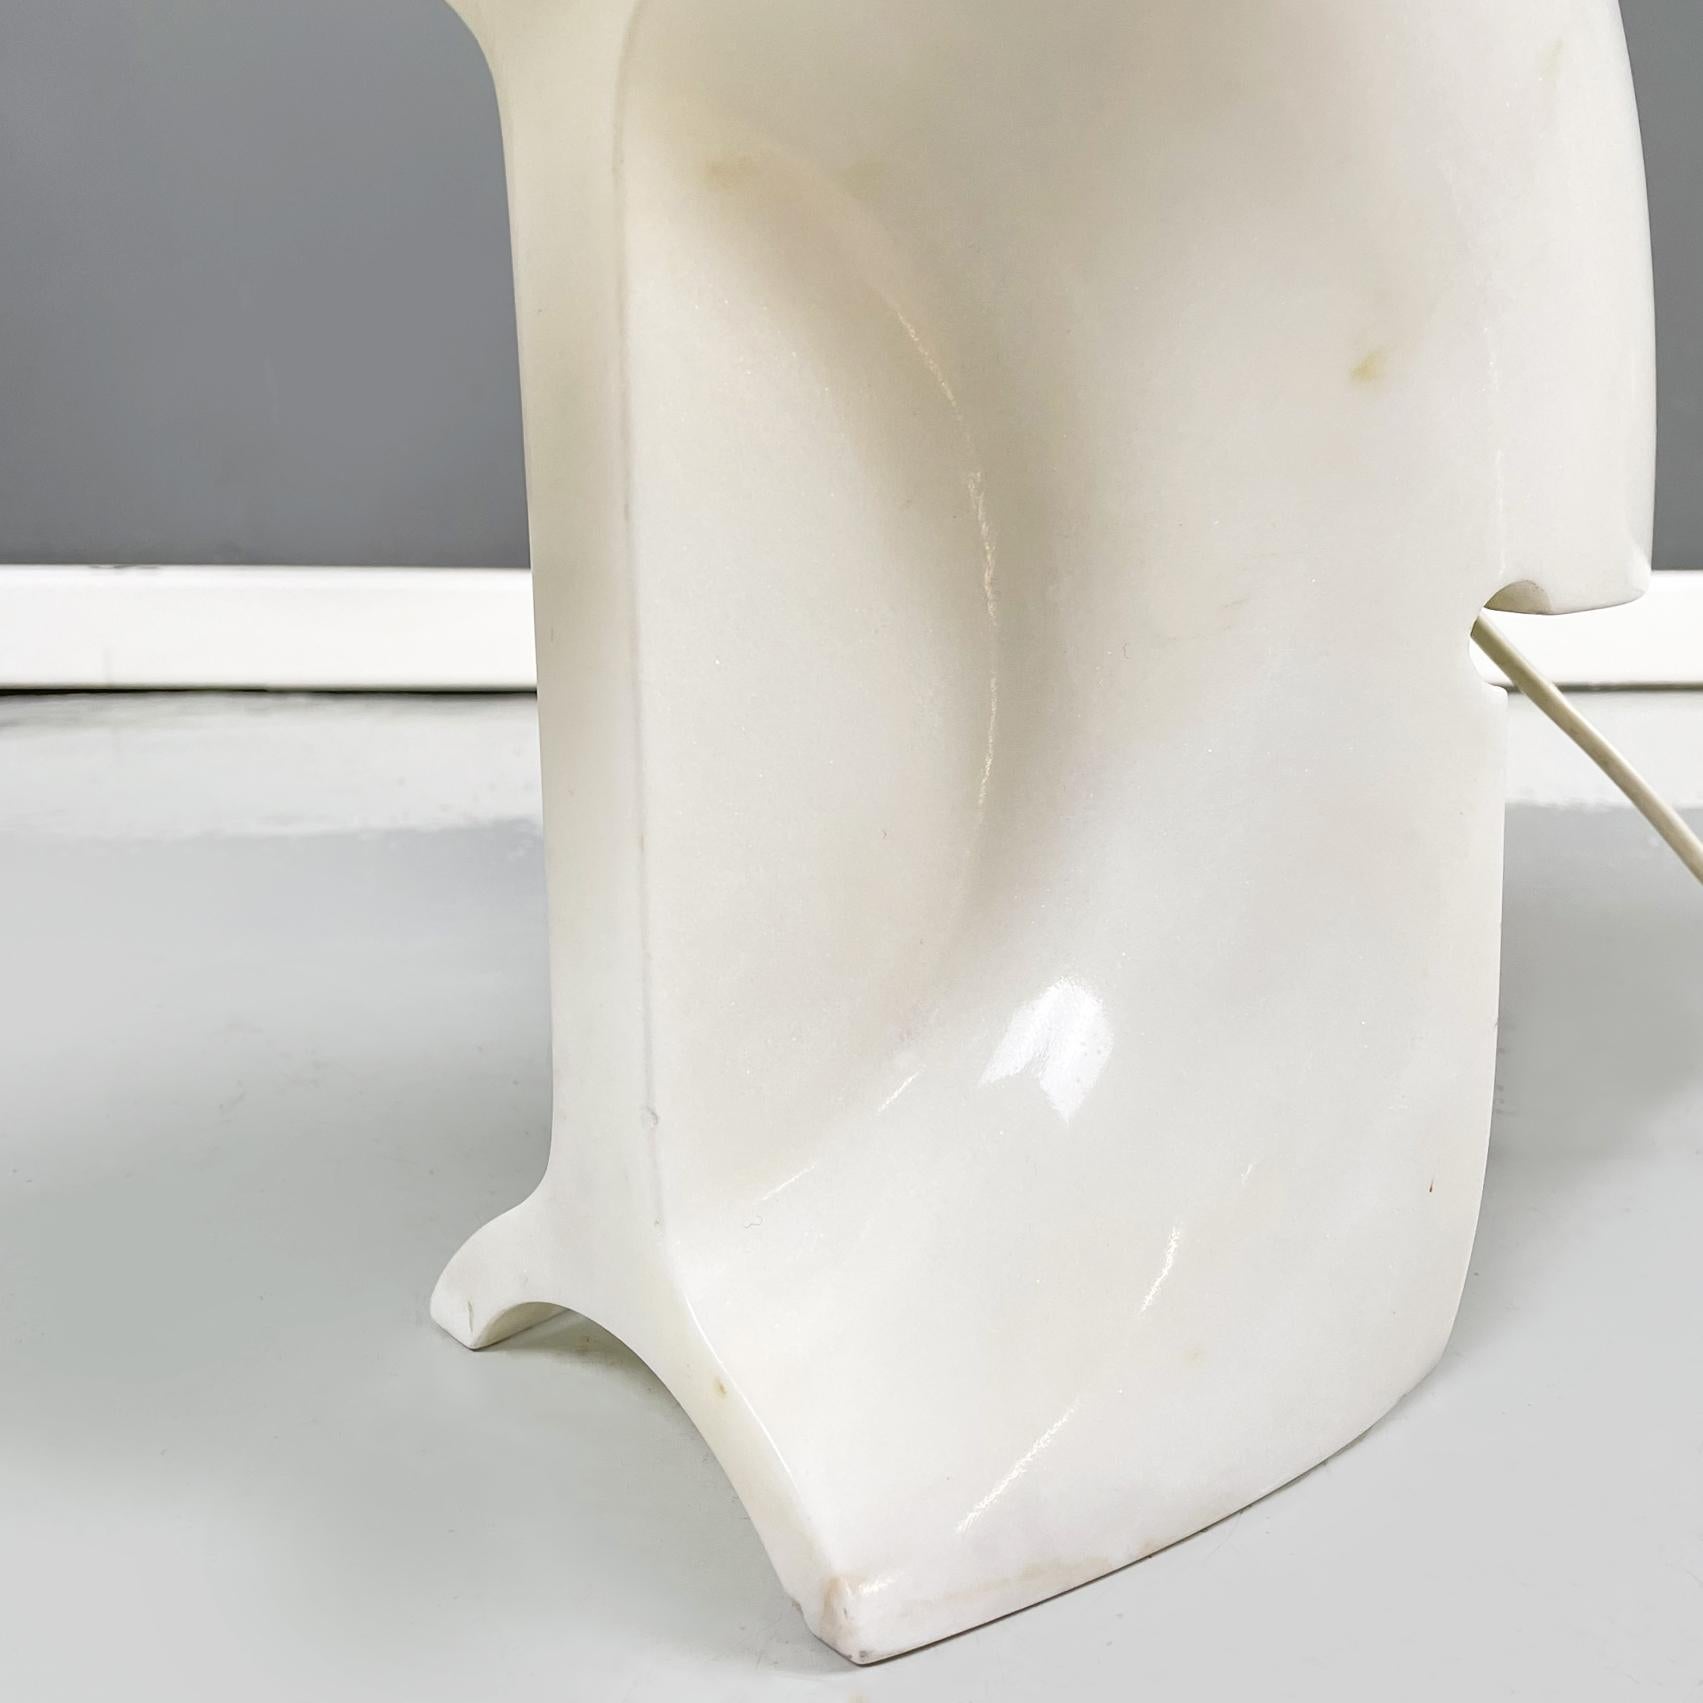 Italian Modern Carrara Marble Table Lamp Biagio by Tobia Scarpa for Flos, 1970s For Sale 7